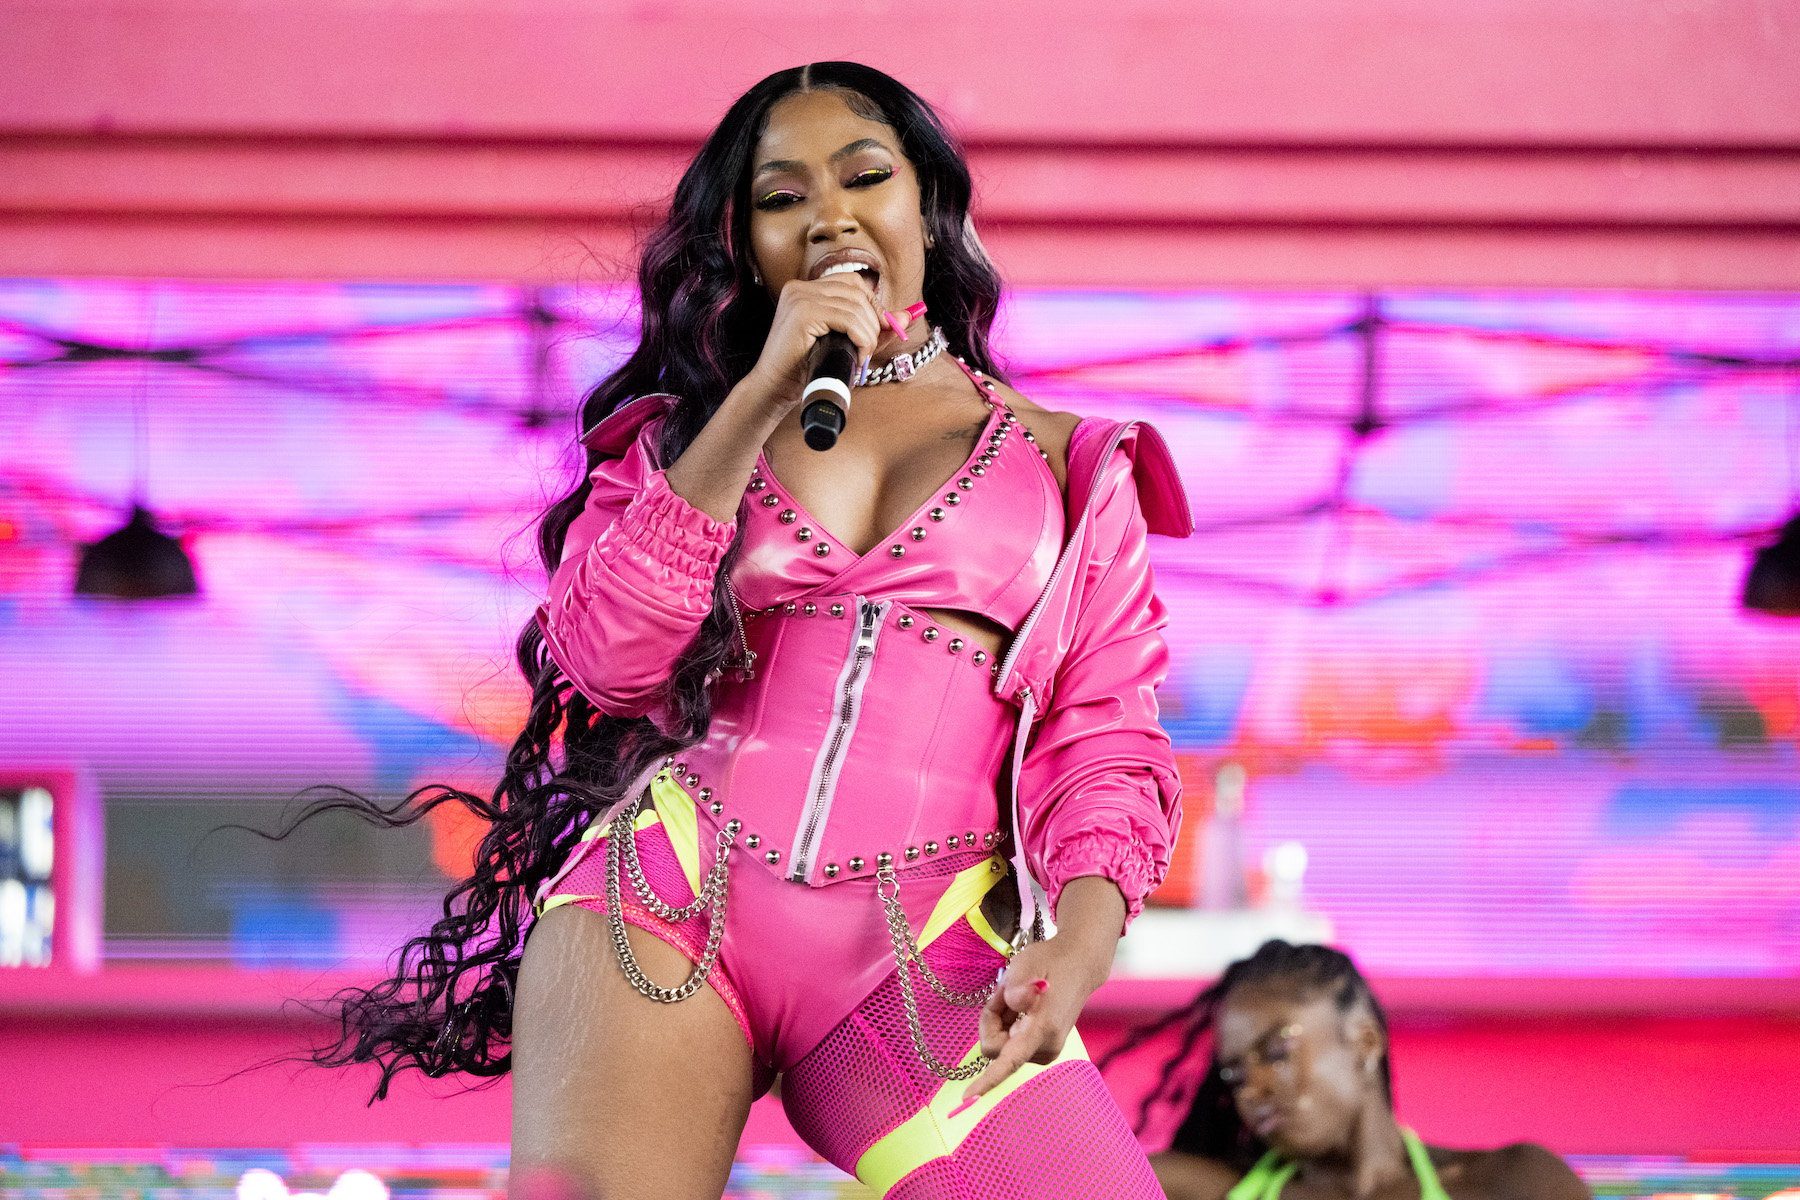 Yung Miami, who has been romantically linked to Diddym, performing in pink at Coachella